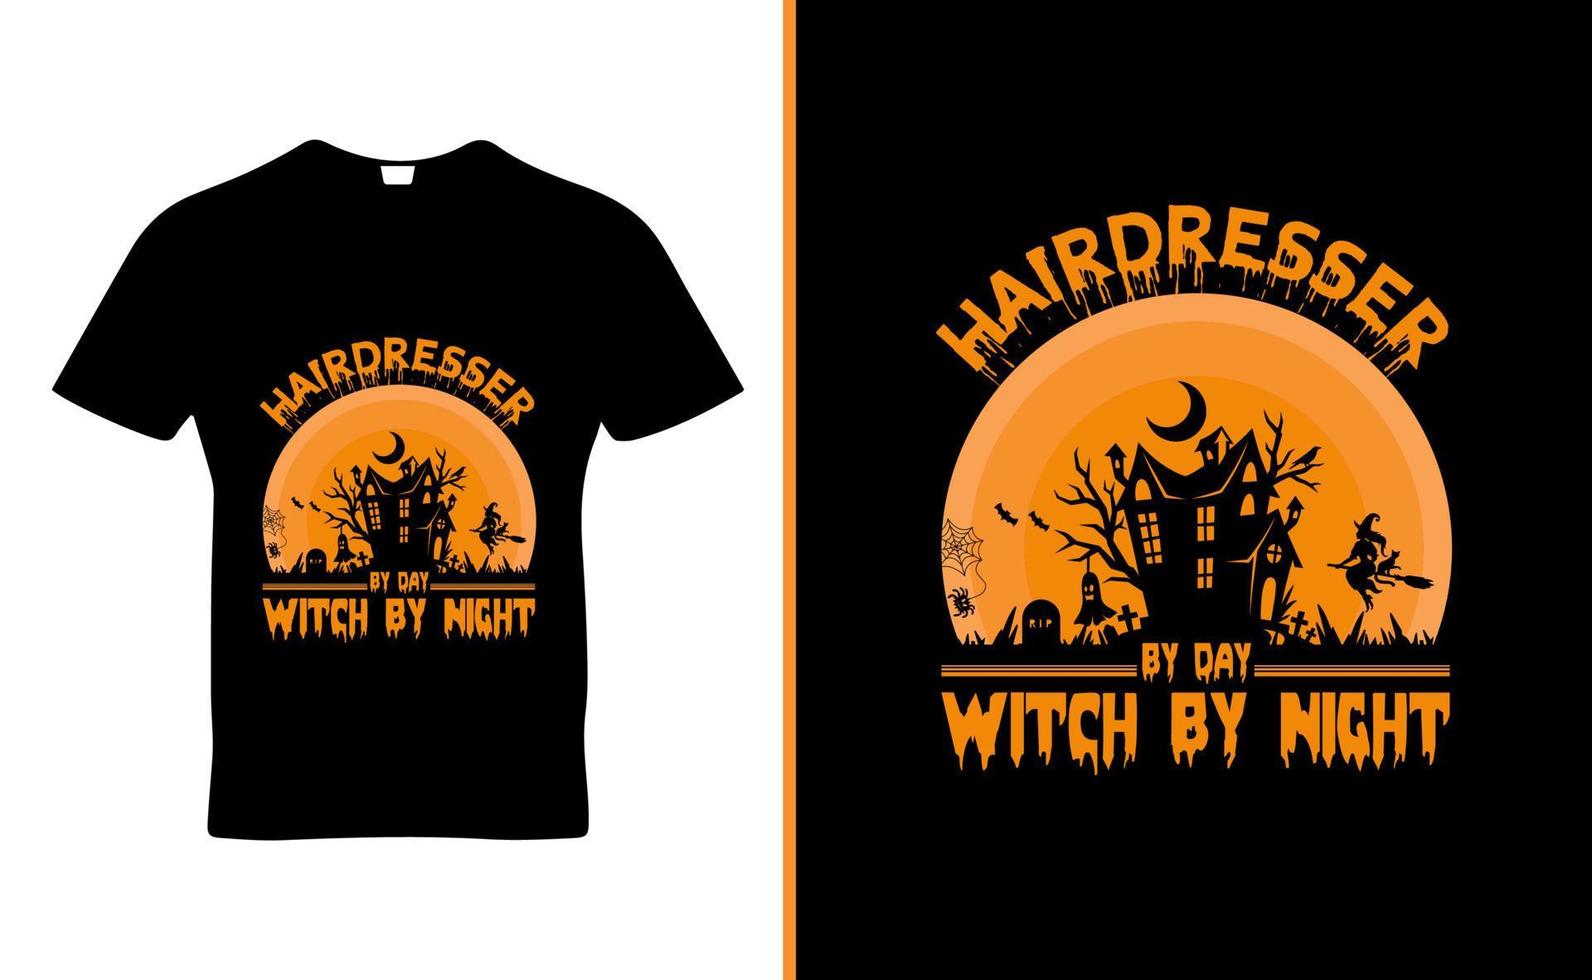 Hairdresser By day  witch by night  quote t-shirt template design vector